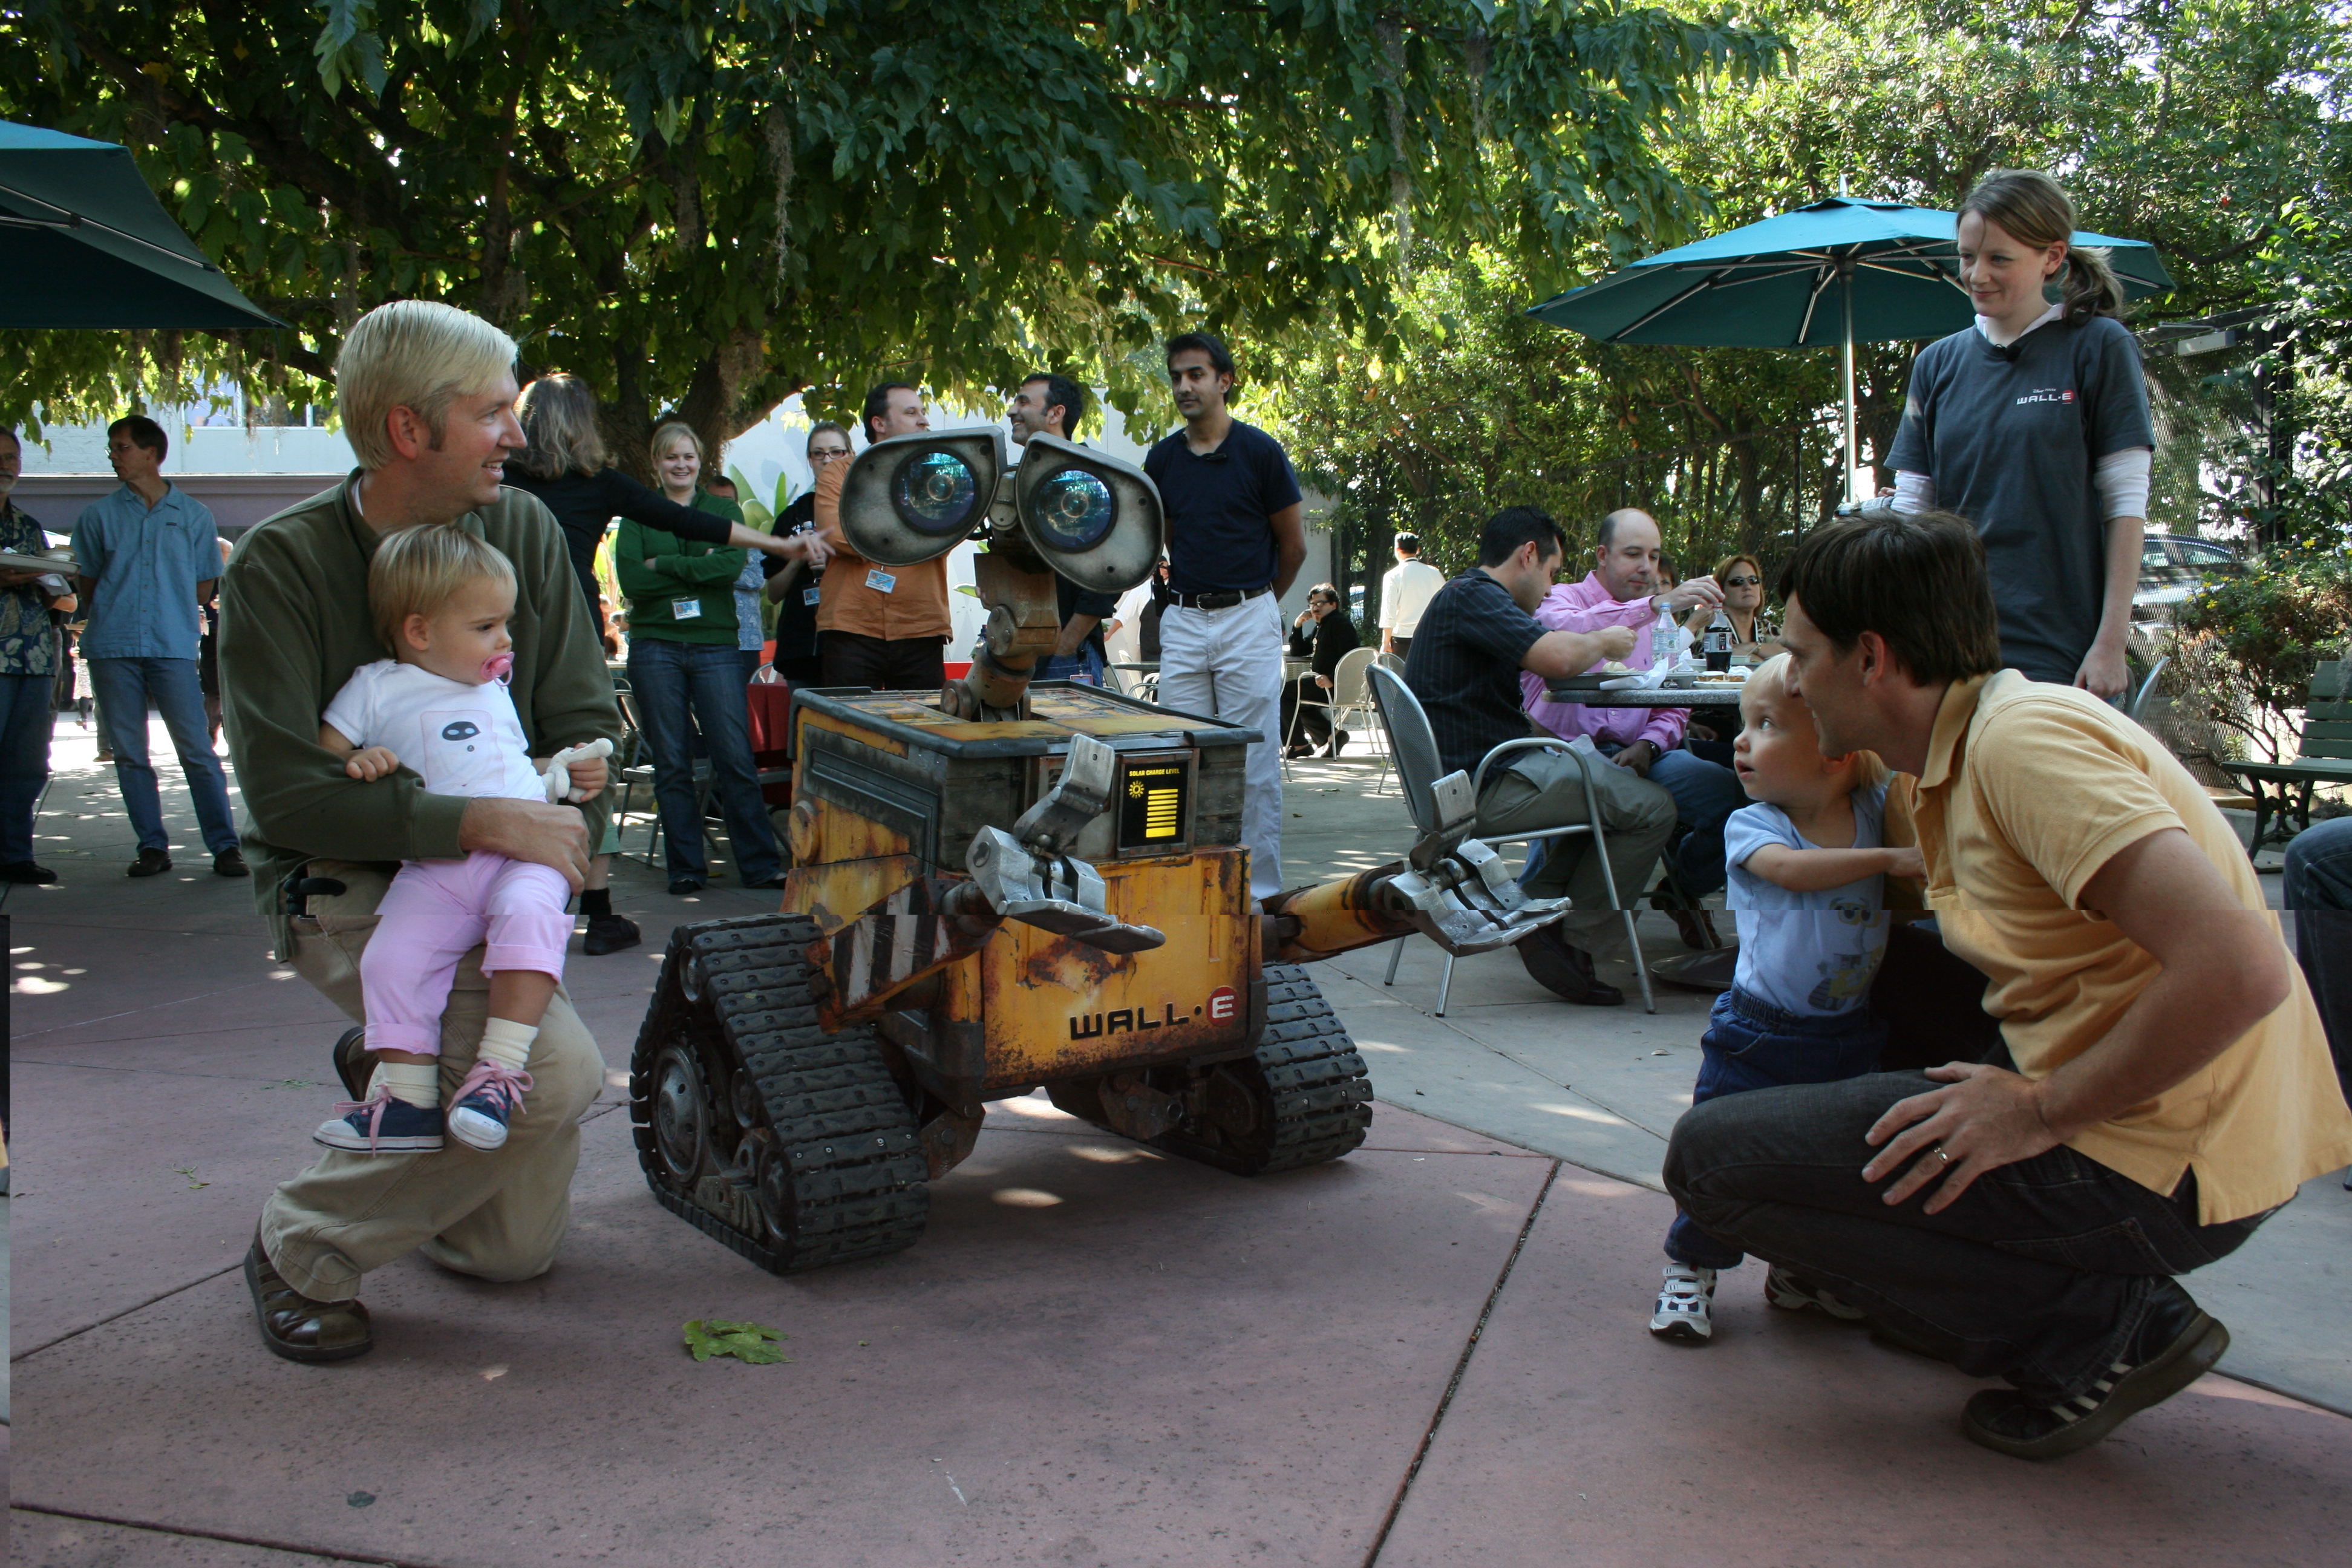 Imagineers and family interacting with the WALL-E animatronic figure.